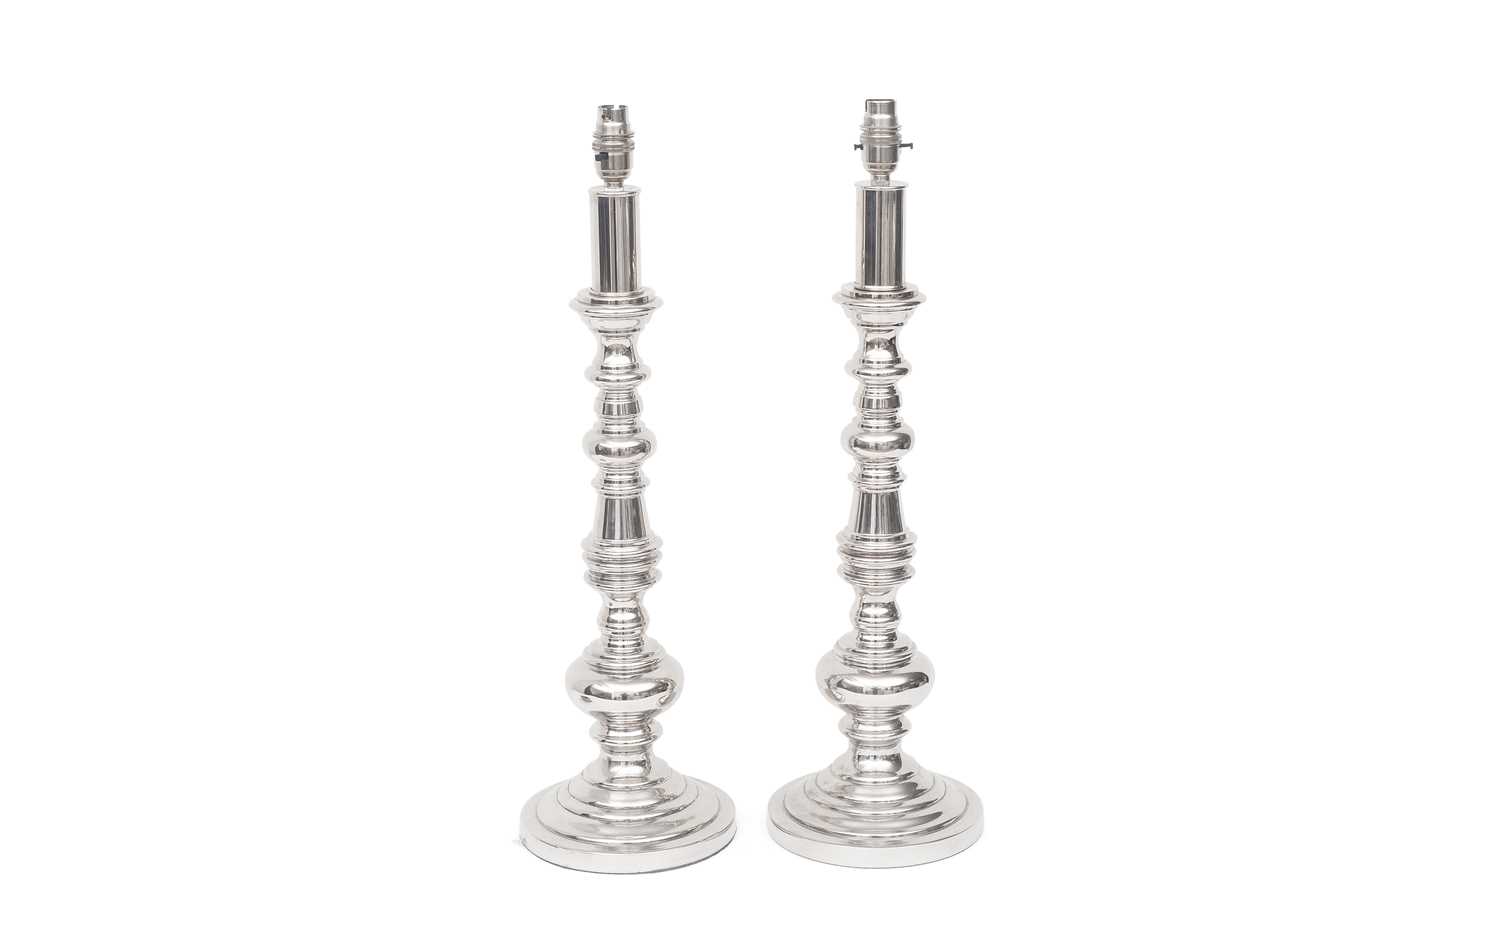 A PAIR OF NICKEL PLATED BALUSTER LAMP BASES